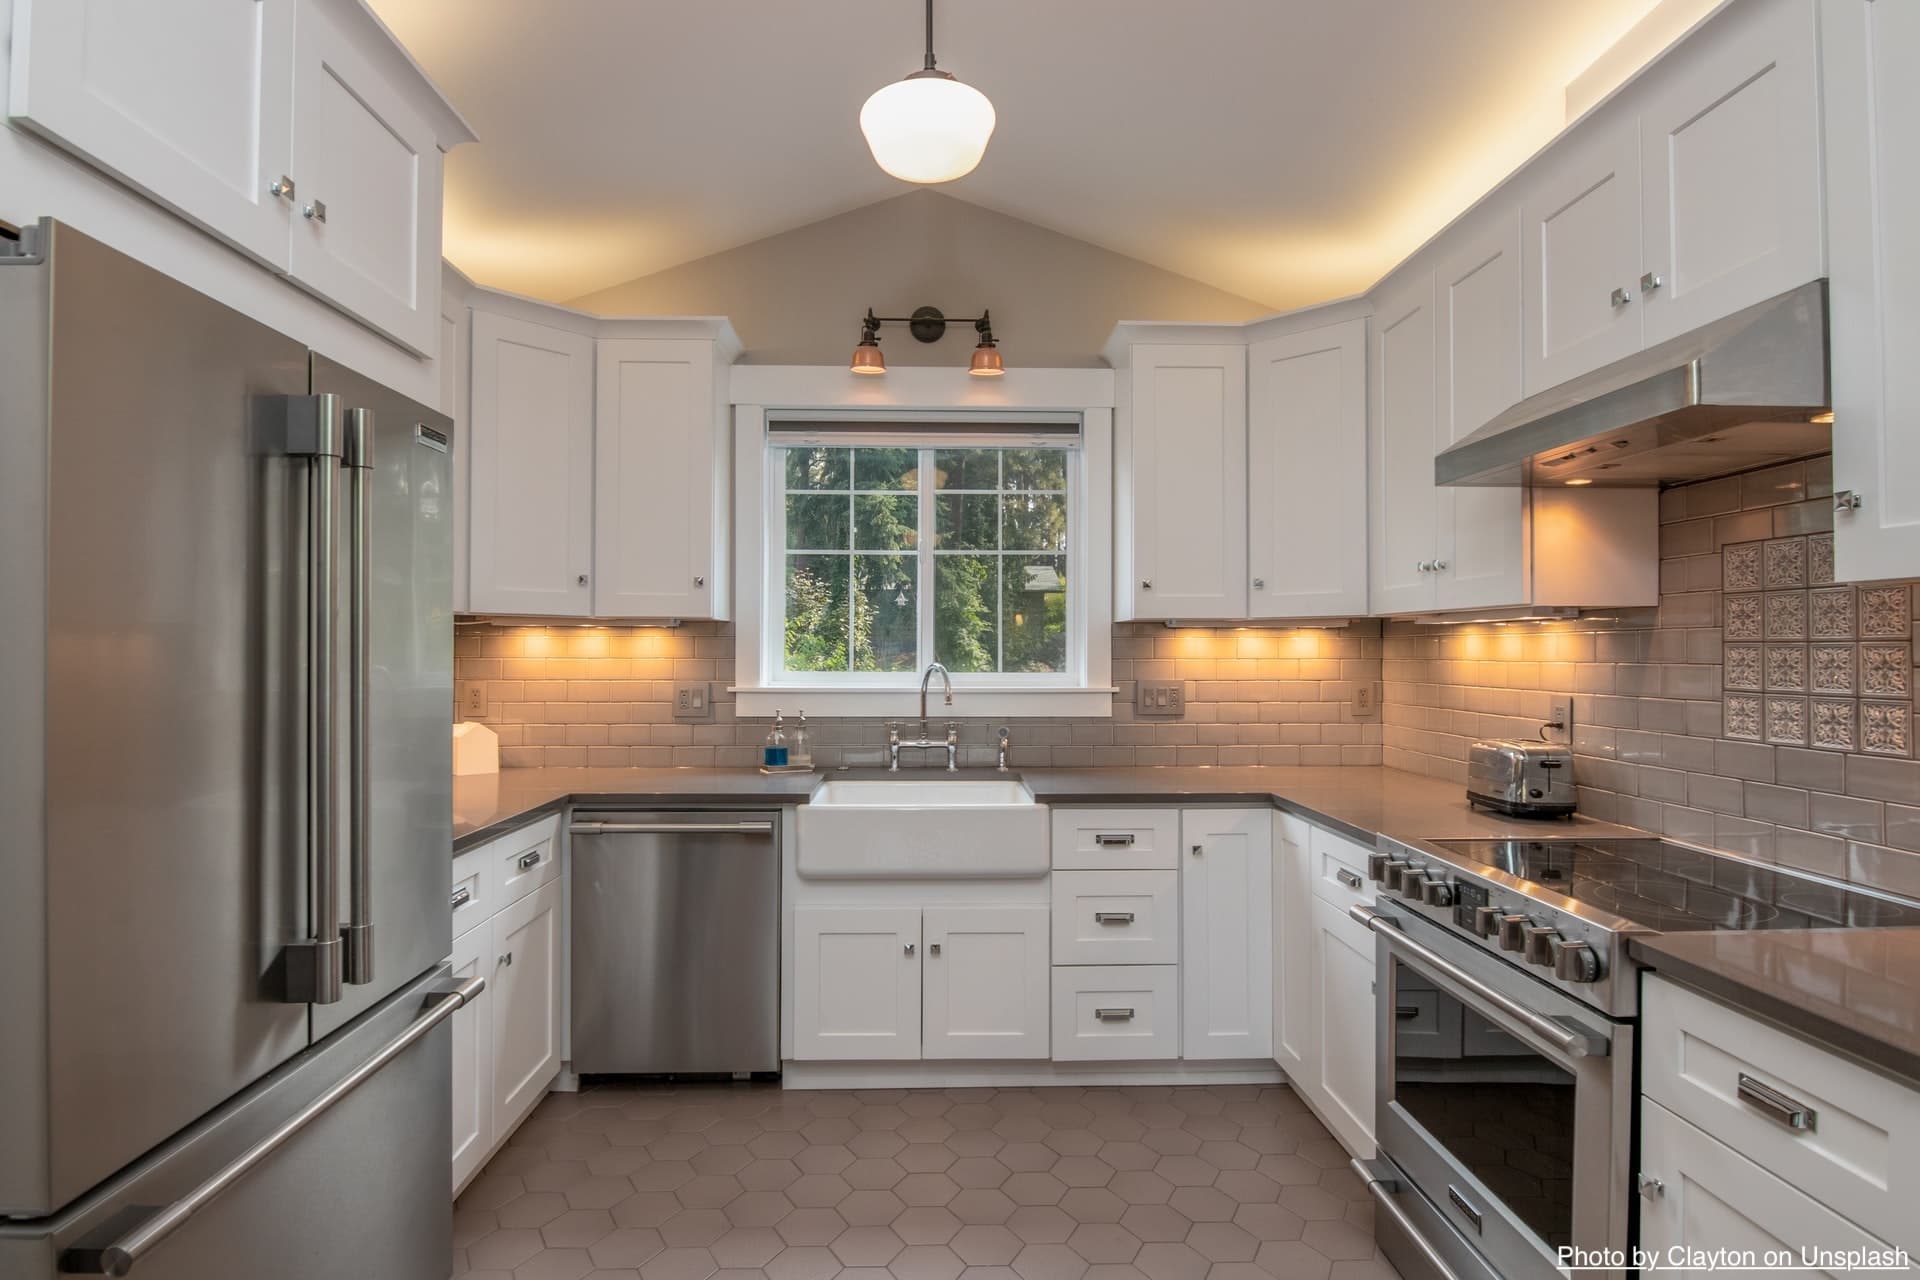 Kitchen Remodeling- Complete Guide For Homeowners